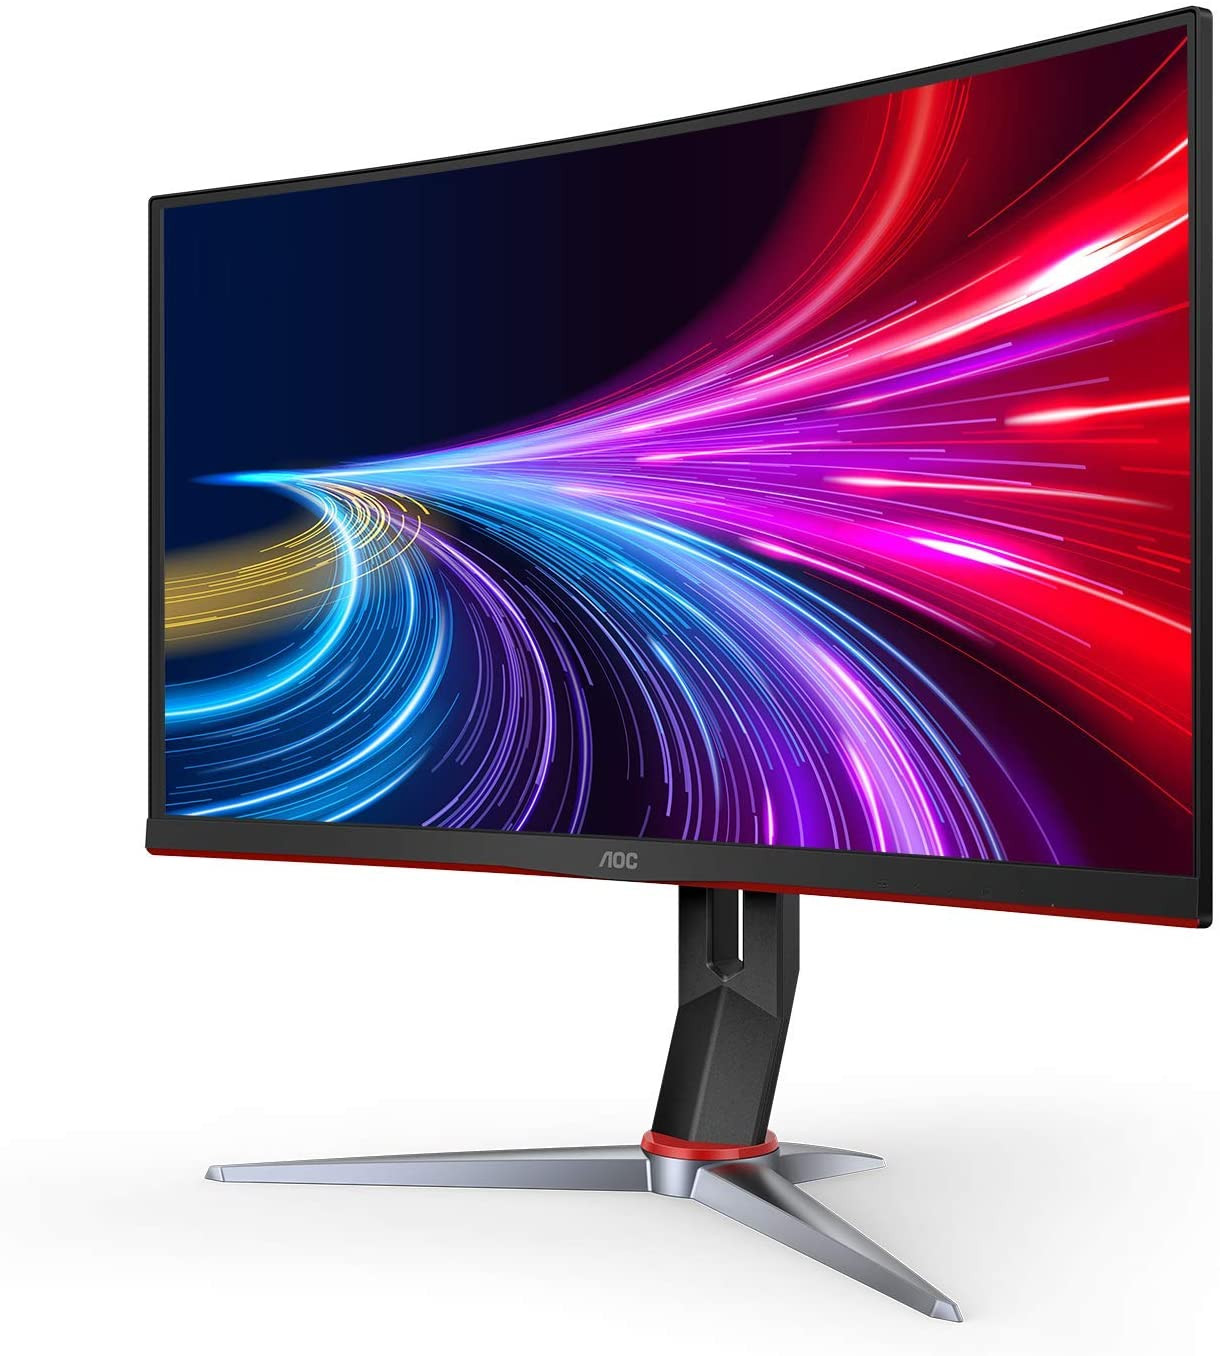 AOC C27G2Z 27" Curved Frameless Ultra-Fast Gaming Monitor, FHD 1080p, 0.5ms 240Hz, FreeSync, HDMI/DP/VGA, Height Adjustable, 3-Year Zero Dead Pixel Guarantee, Black, 27" FHD Curved